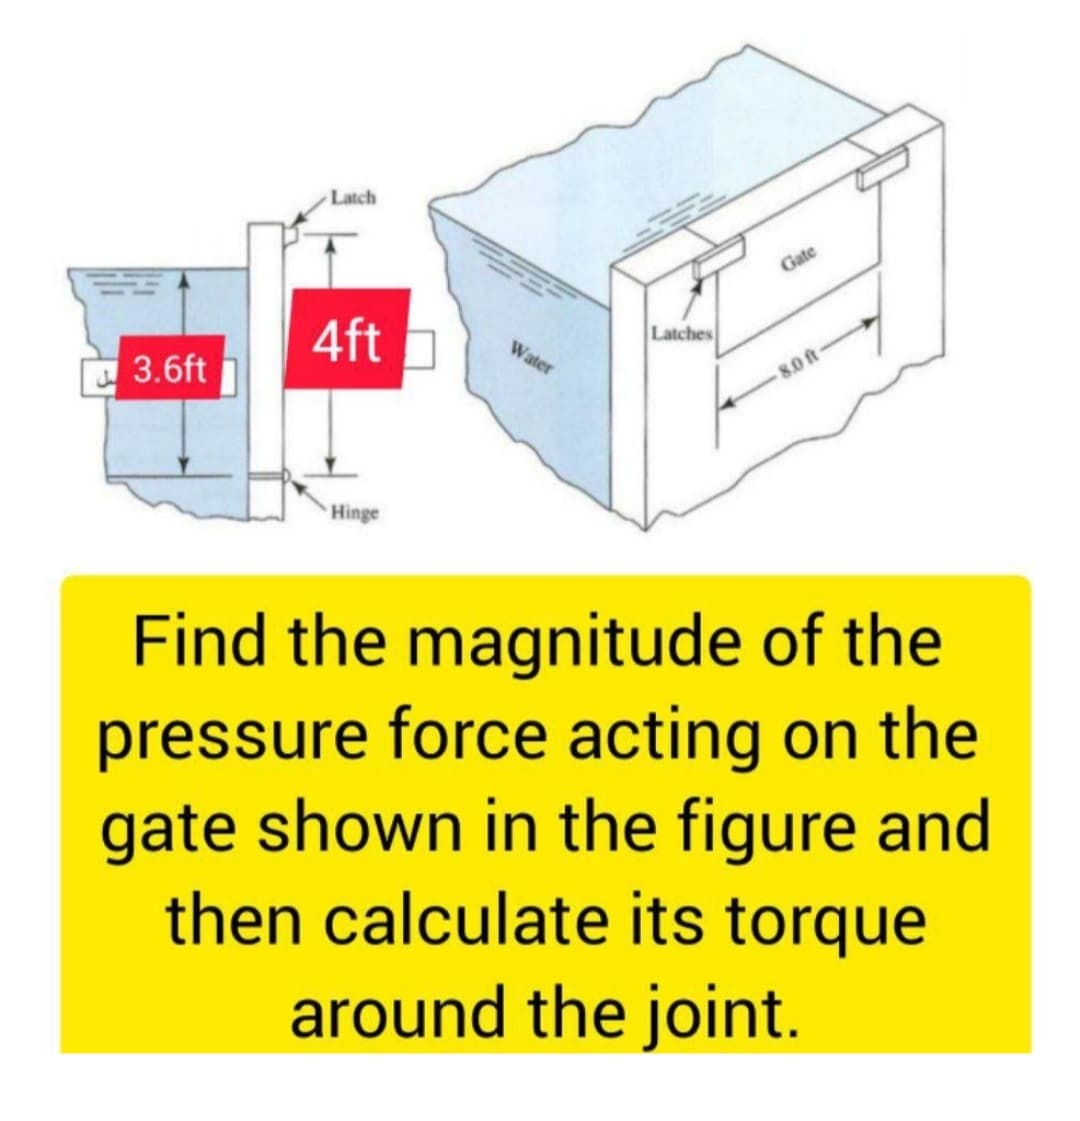 Latch
Gate
4ft
Latches
Water
3.6ft
8.0ft-
Hinge
Find the magnitude of the
pressure force acting on the
gate shown in the figure and
then calculate its torque
around the joint.
